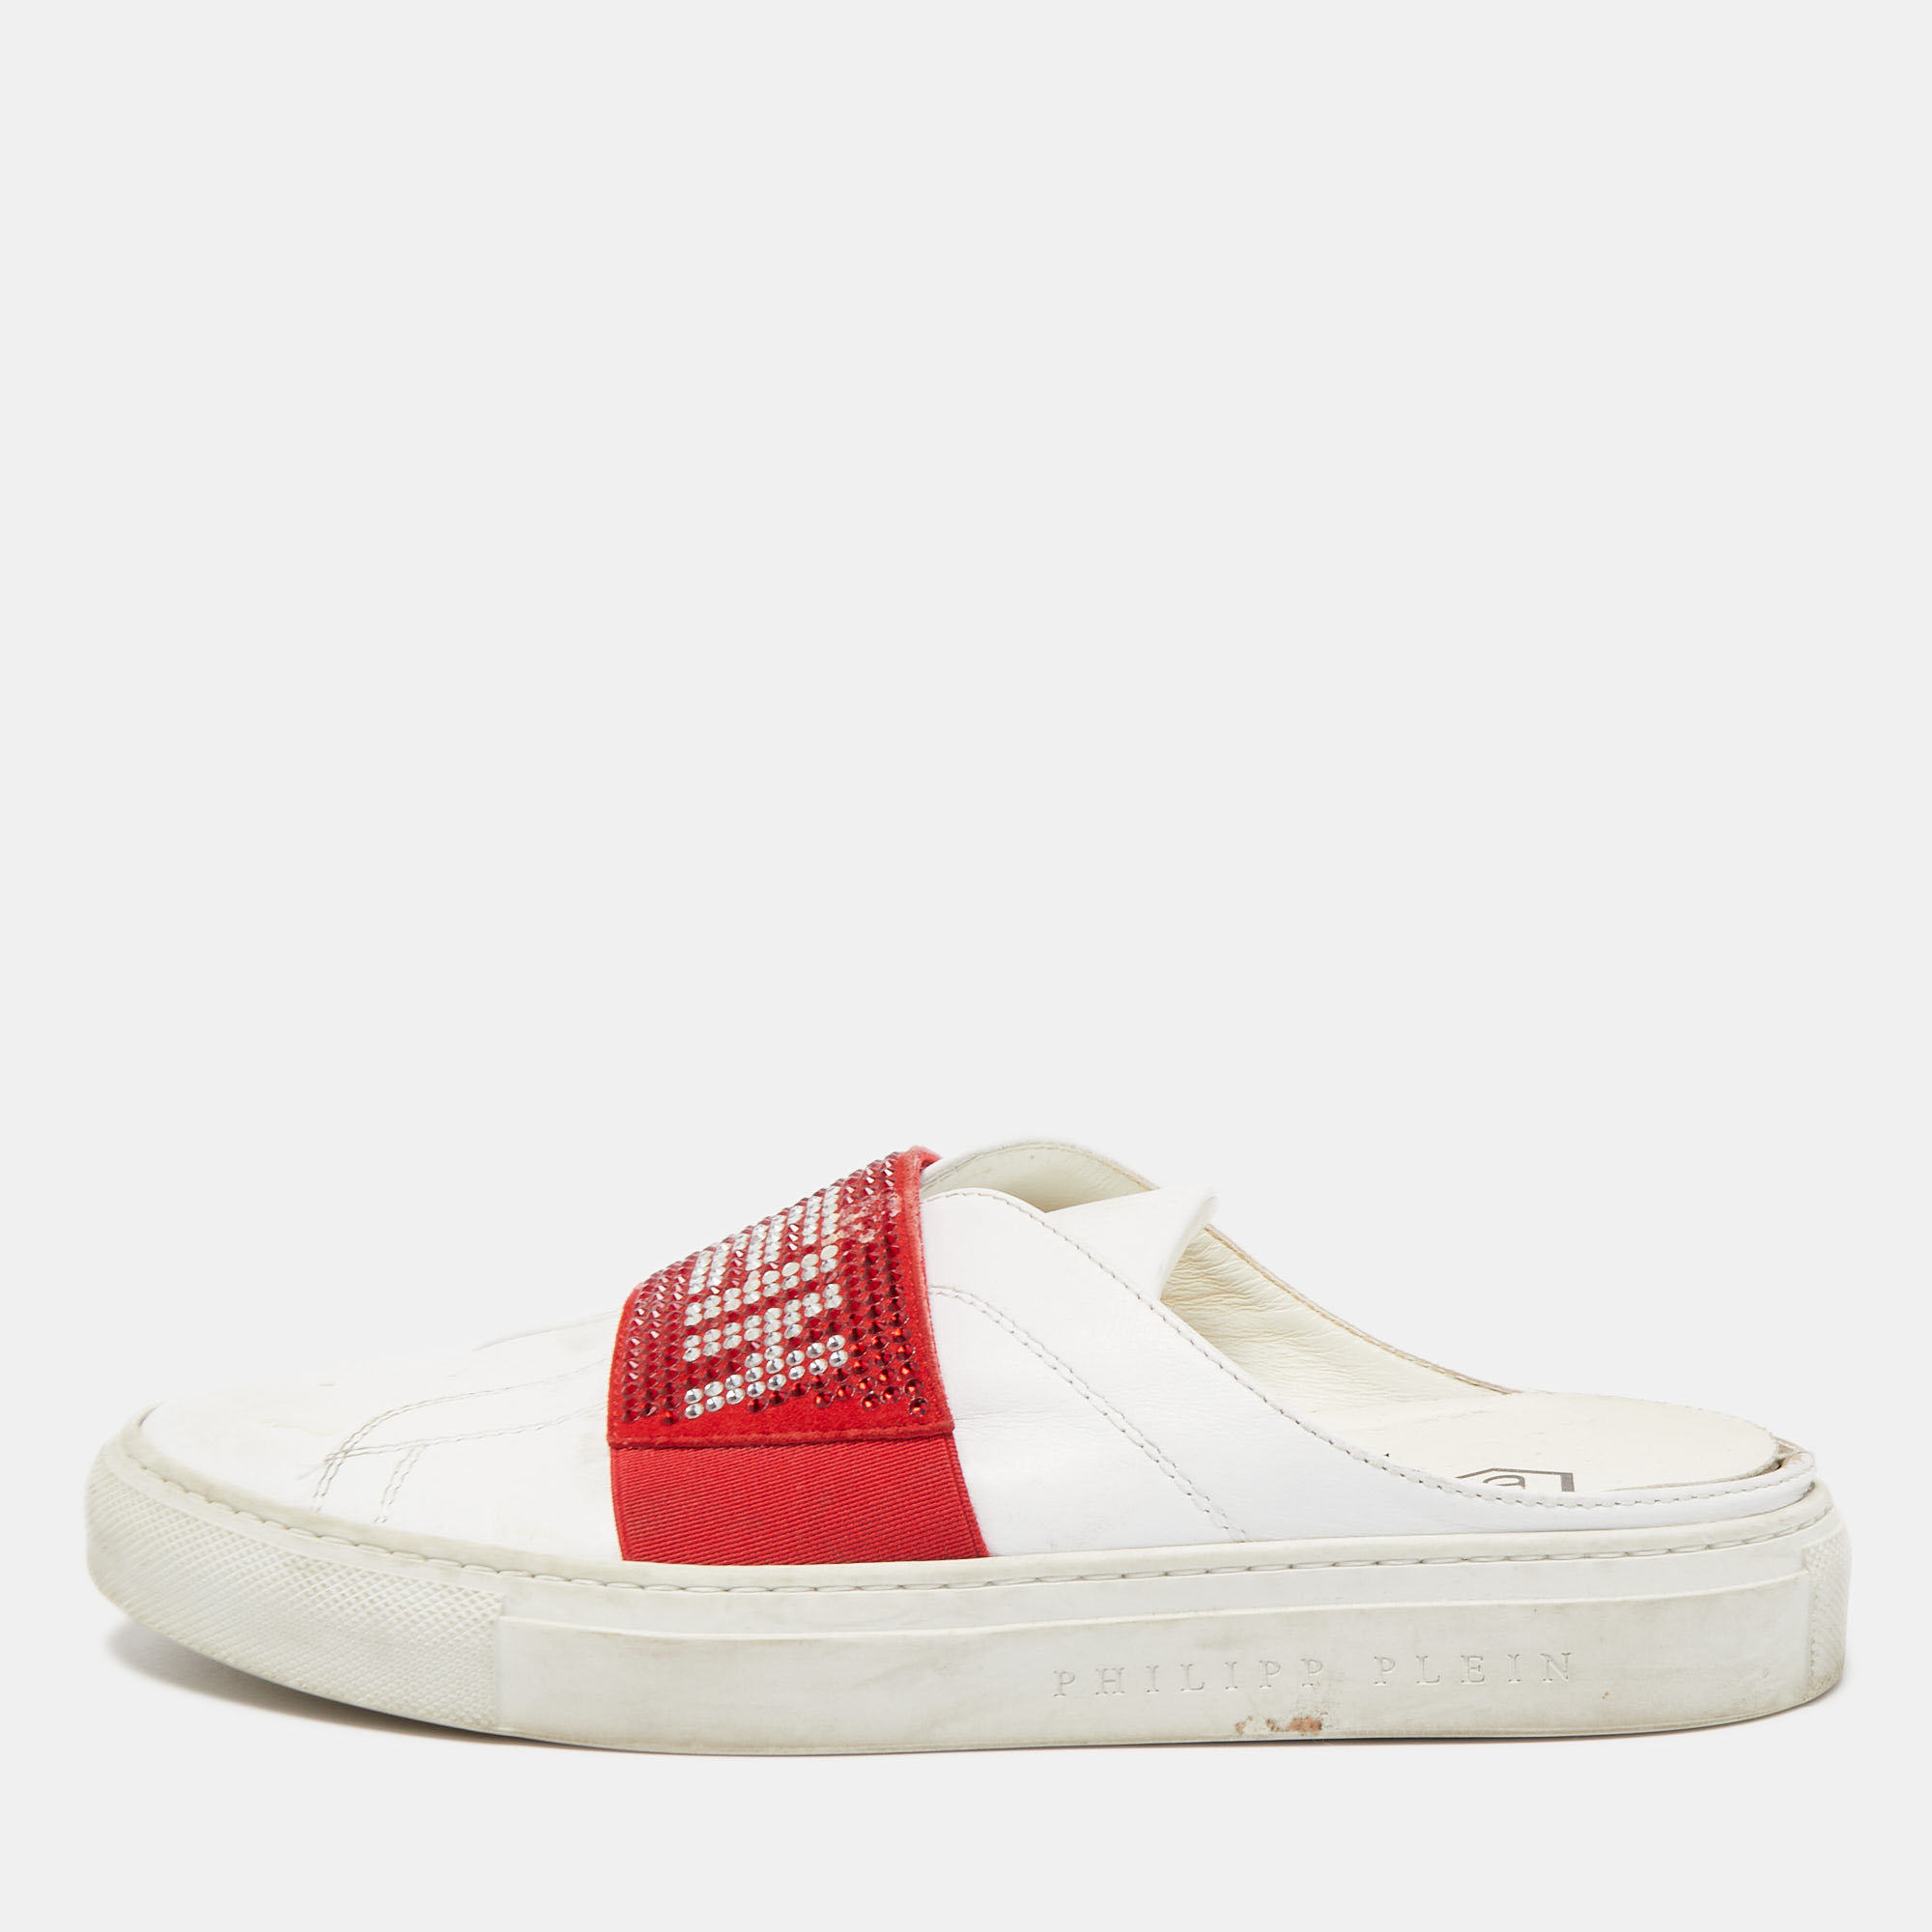 Pre-owned Philipp Plein Phillip Plein White/red Leather Crystal Embellished Logo Sneaker Mules Size 38